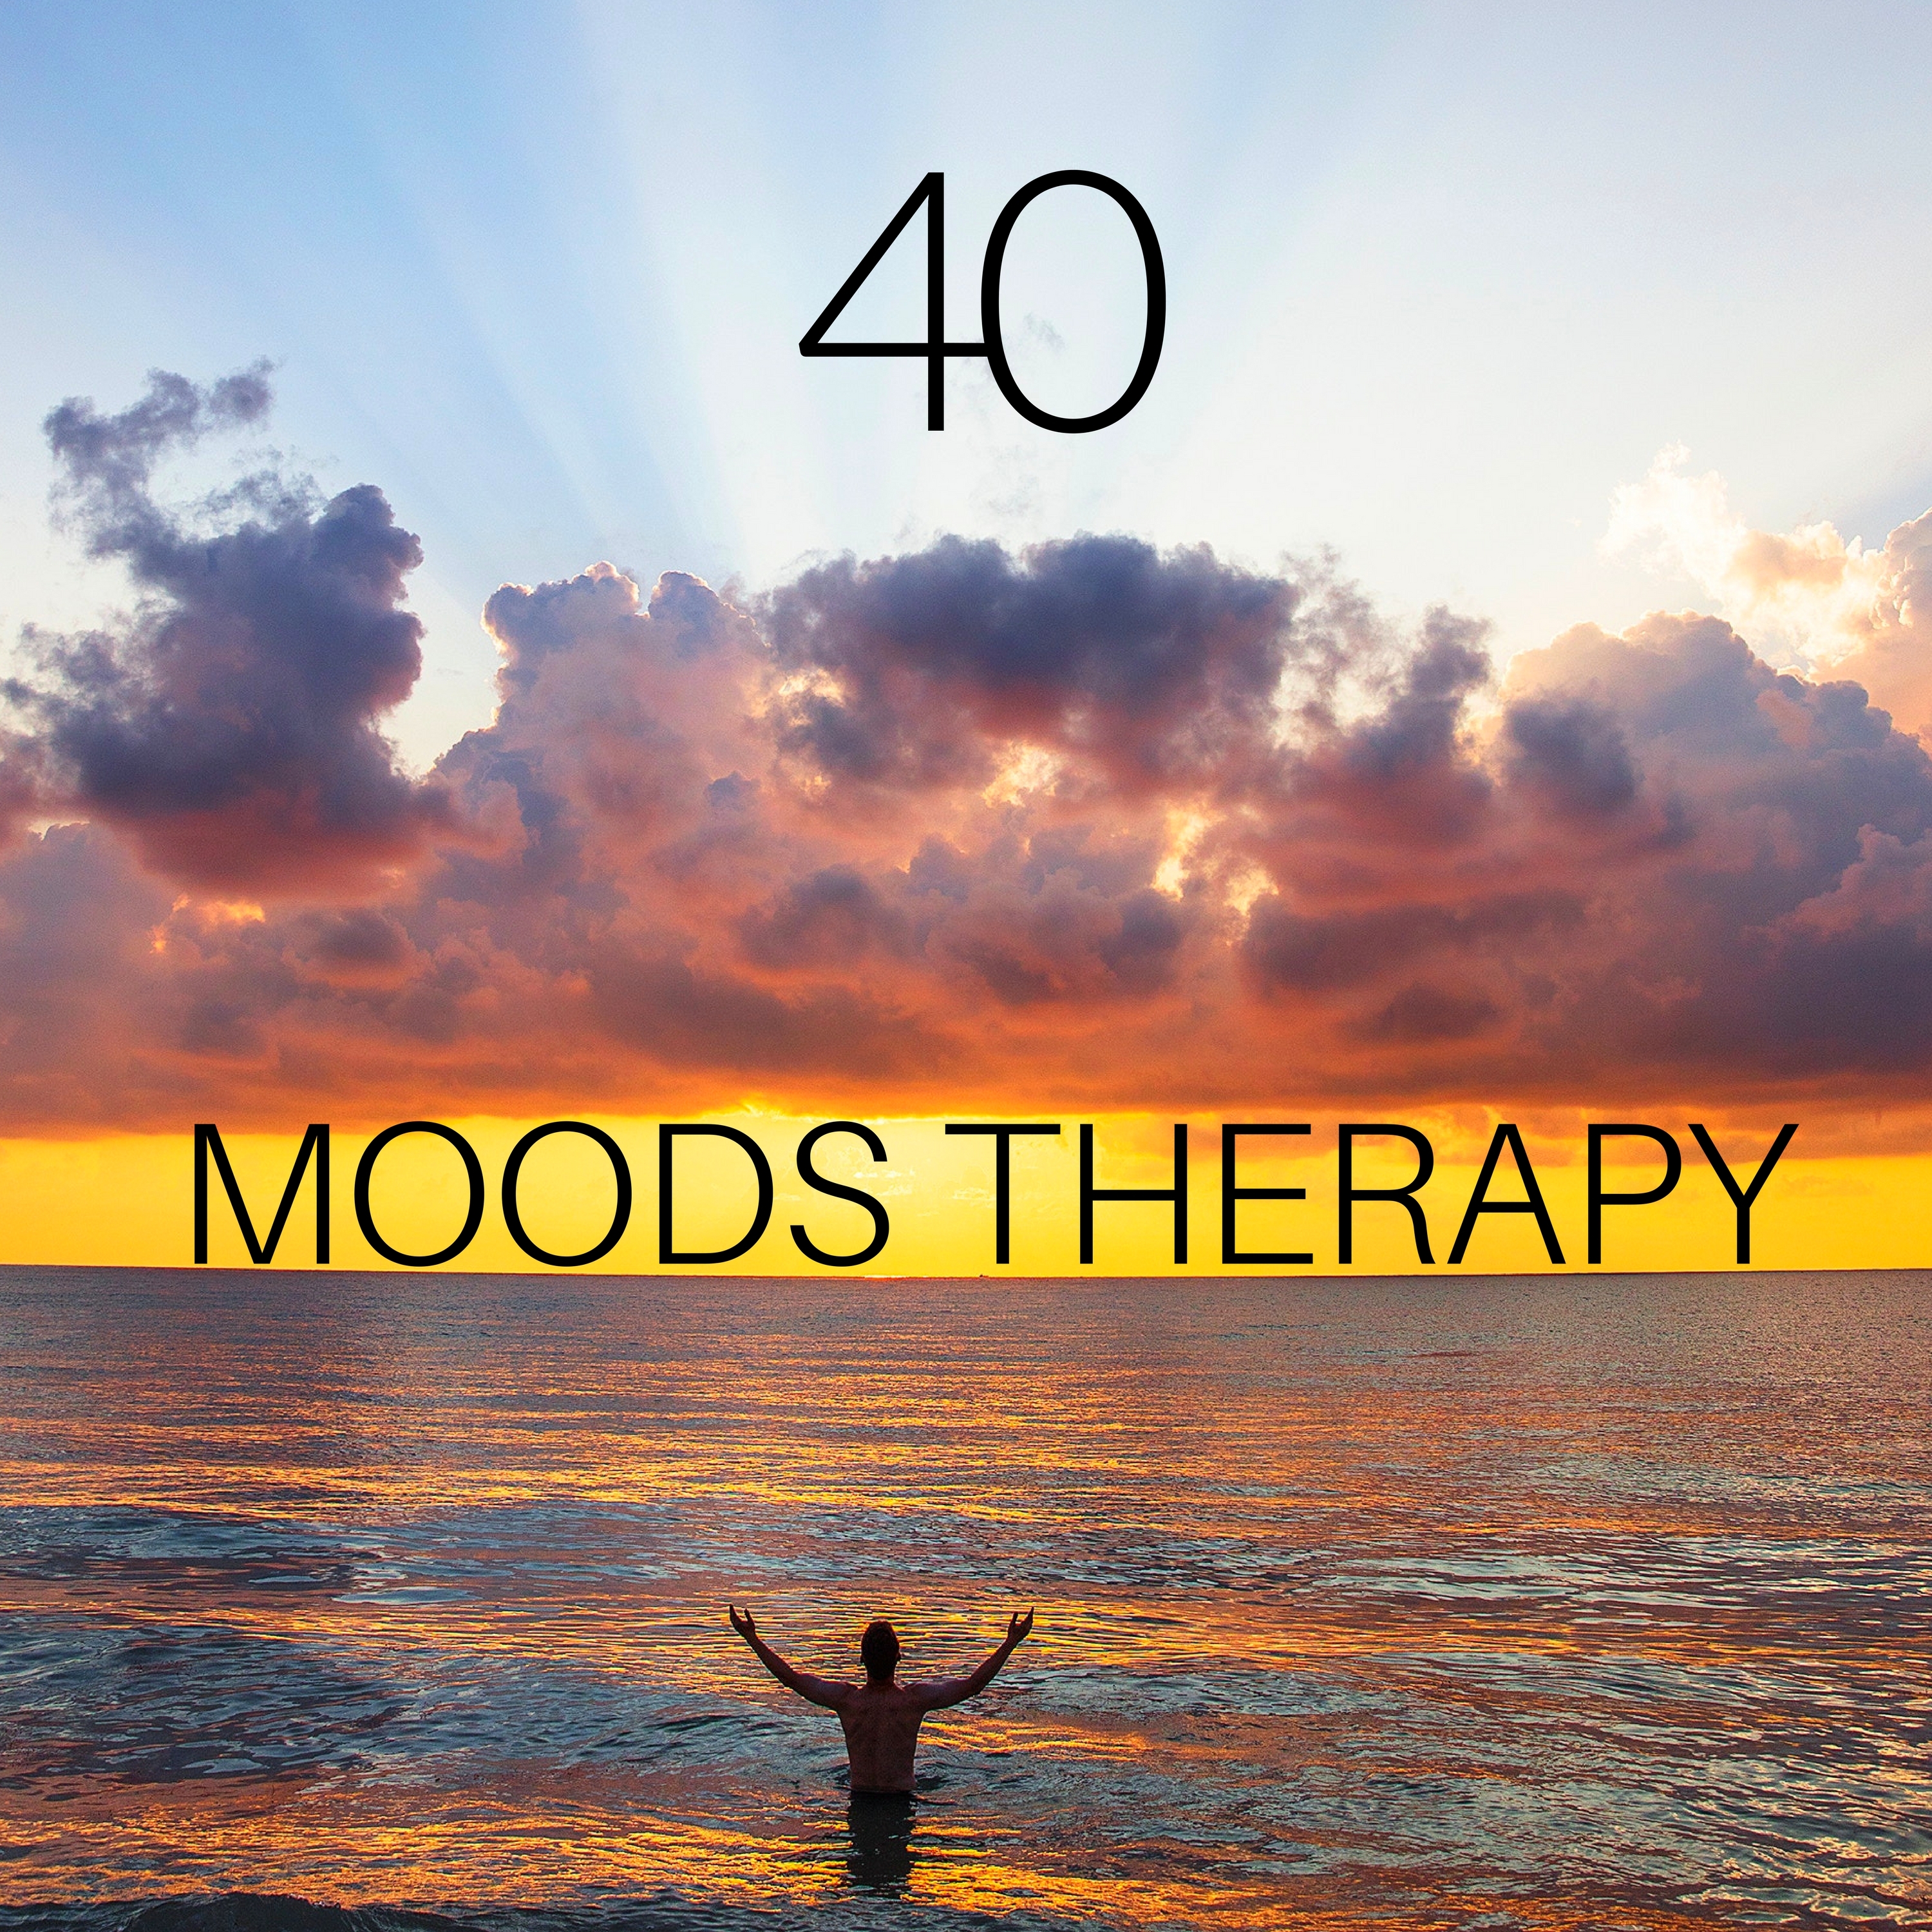 Moods Therapy